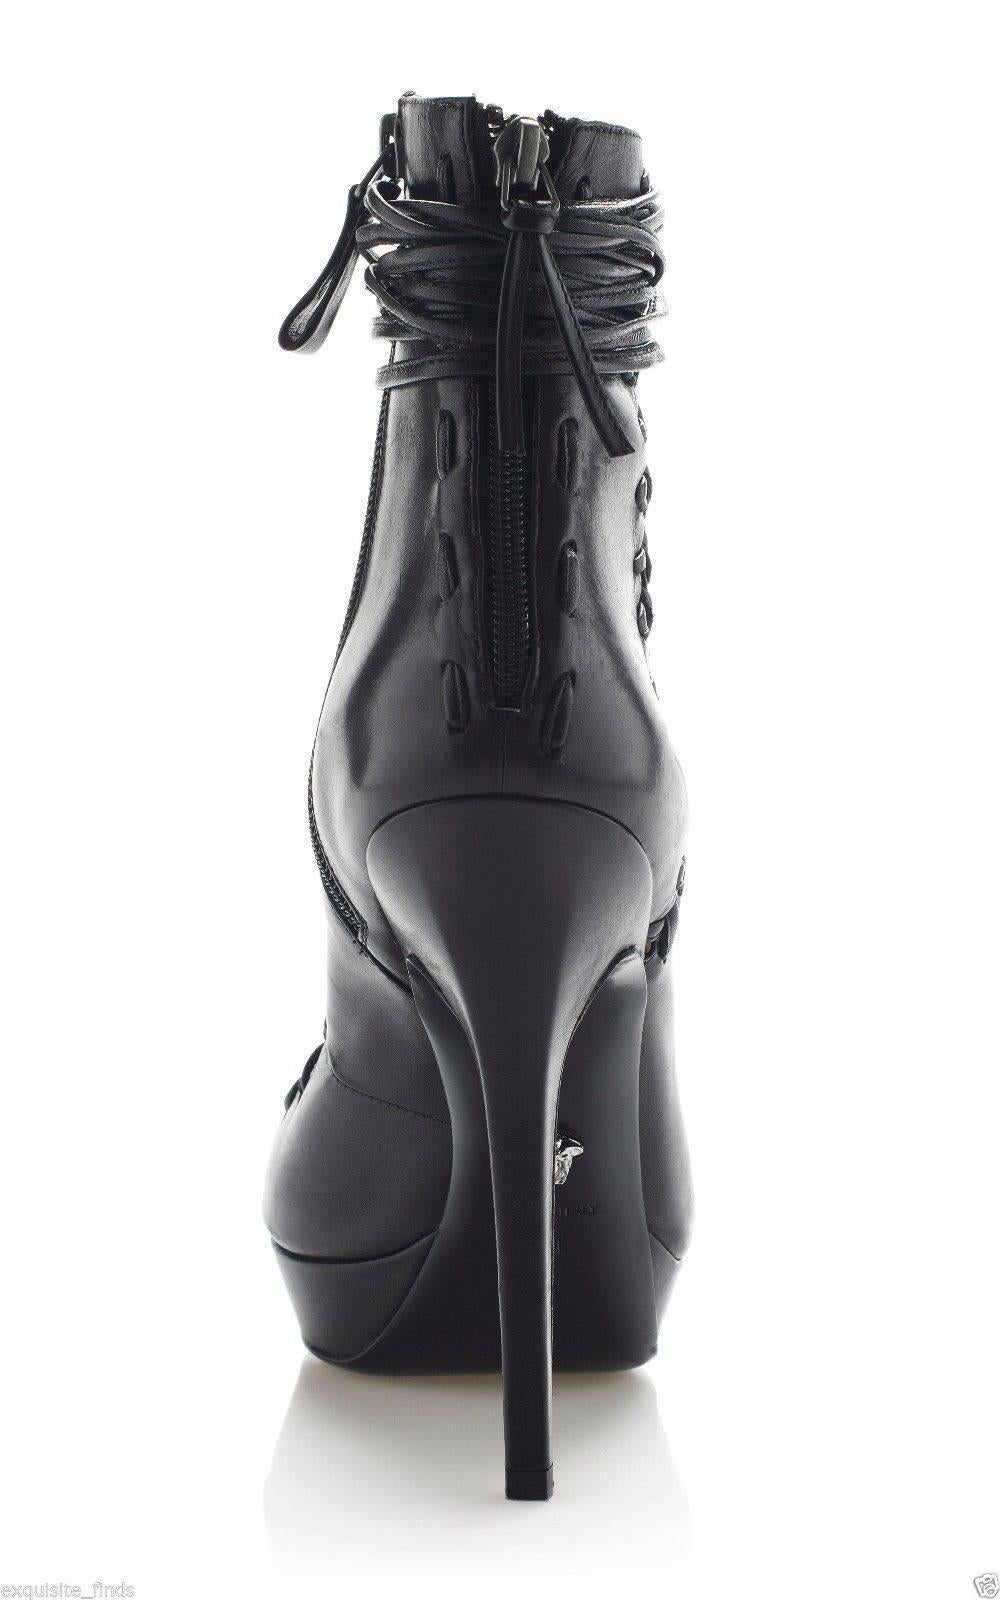 VERSACE 

BLACK LEATHER LACE UP BOOTS

This pointed-toe, lace-up Versace bootie features exposed stitching detail at the back zip.

Side zip 

Leather insole 

Leather sole 

100% leather 

Made in Italy

Covered heel measures 5.25 inches 

Platform